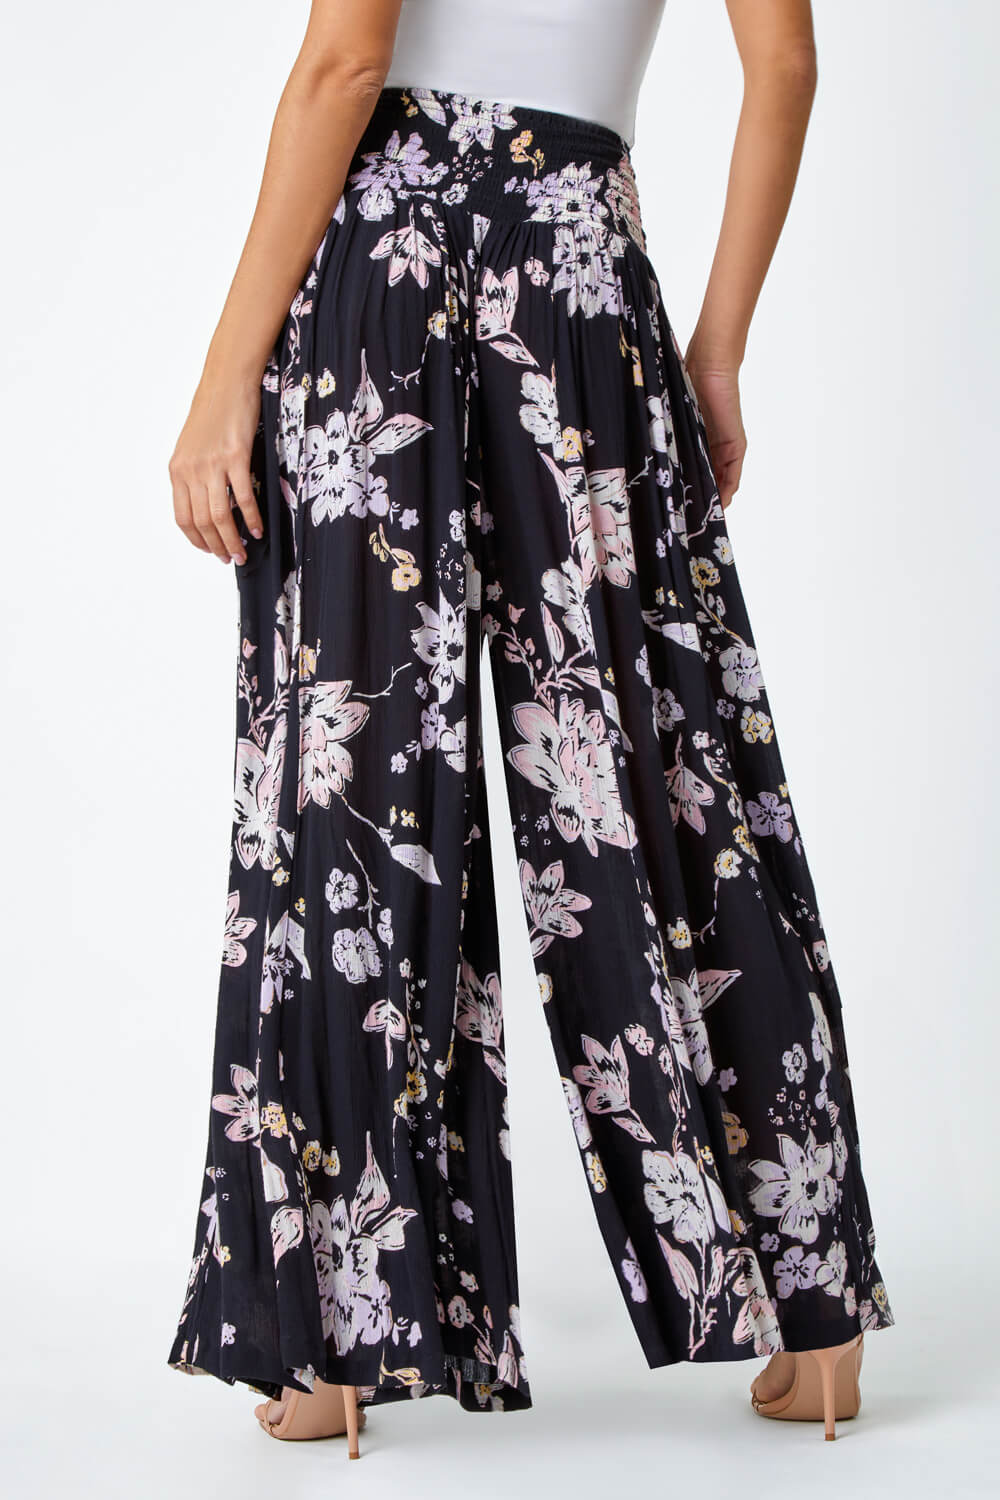 Black Floral Wide Leg Palazzo Trousers, Image 3 of 5